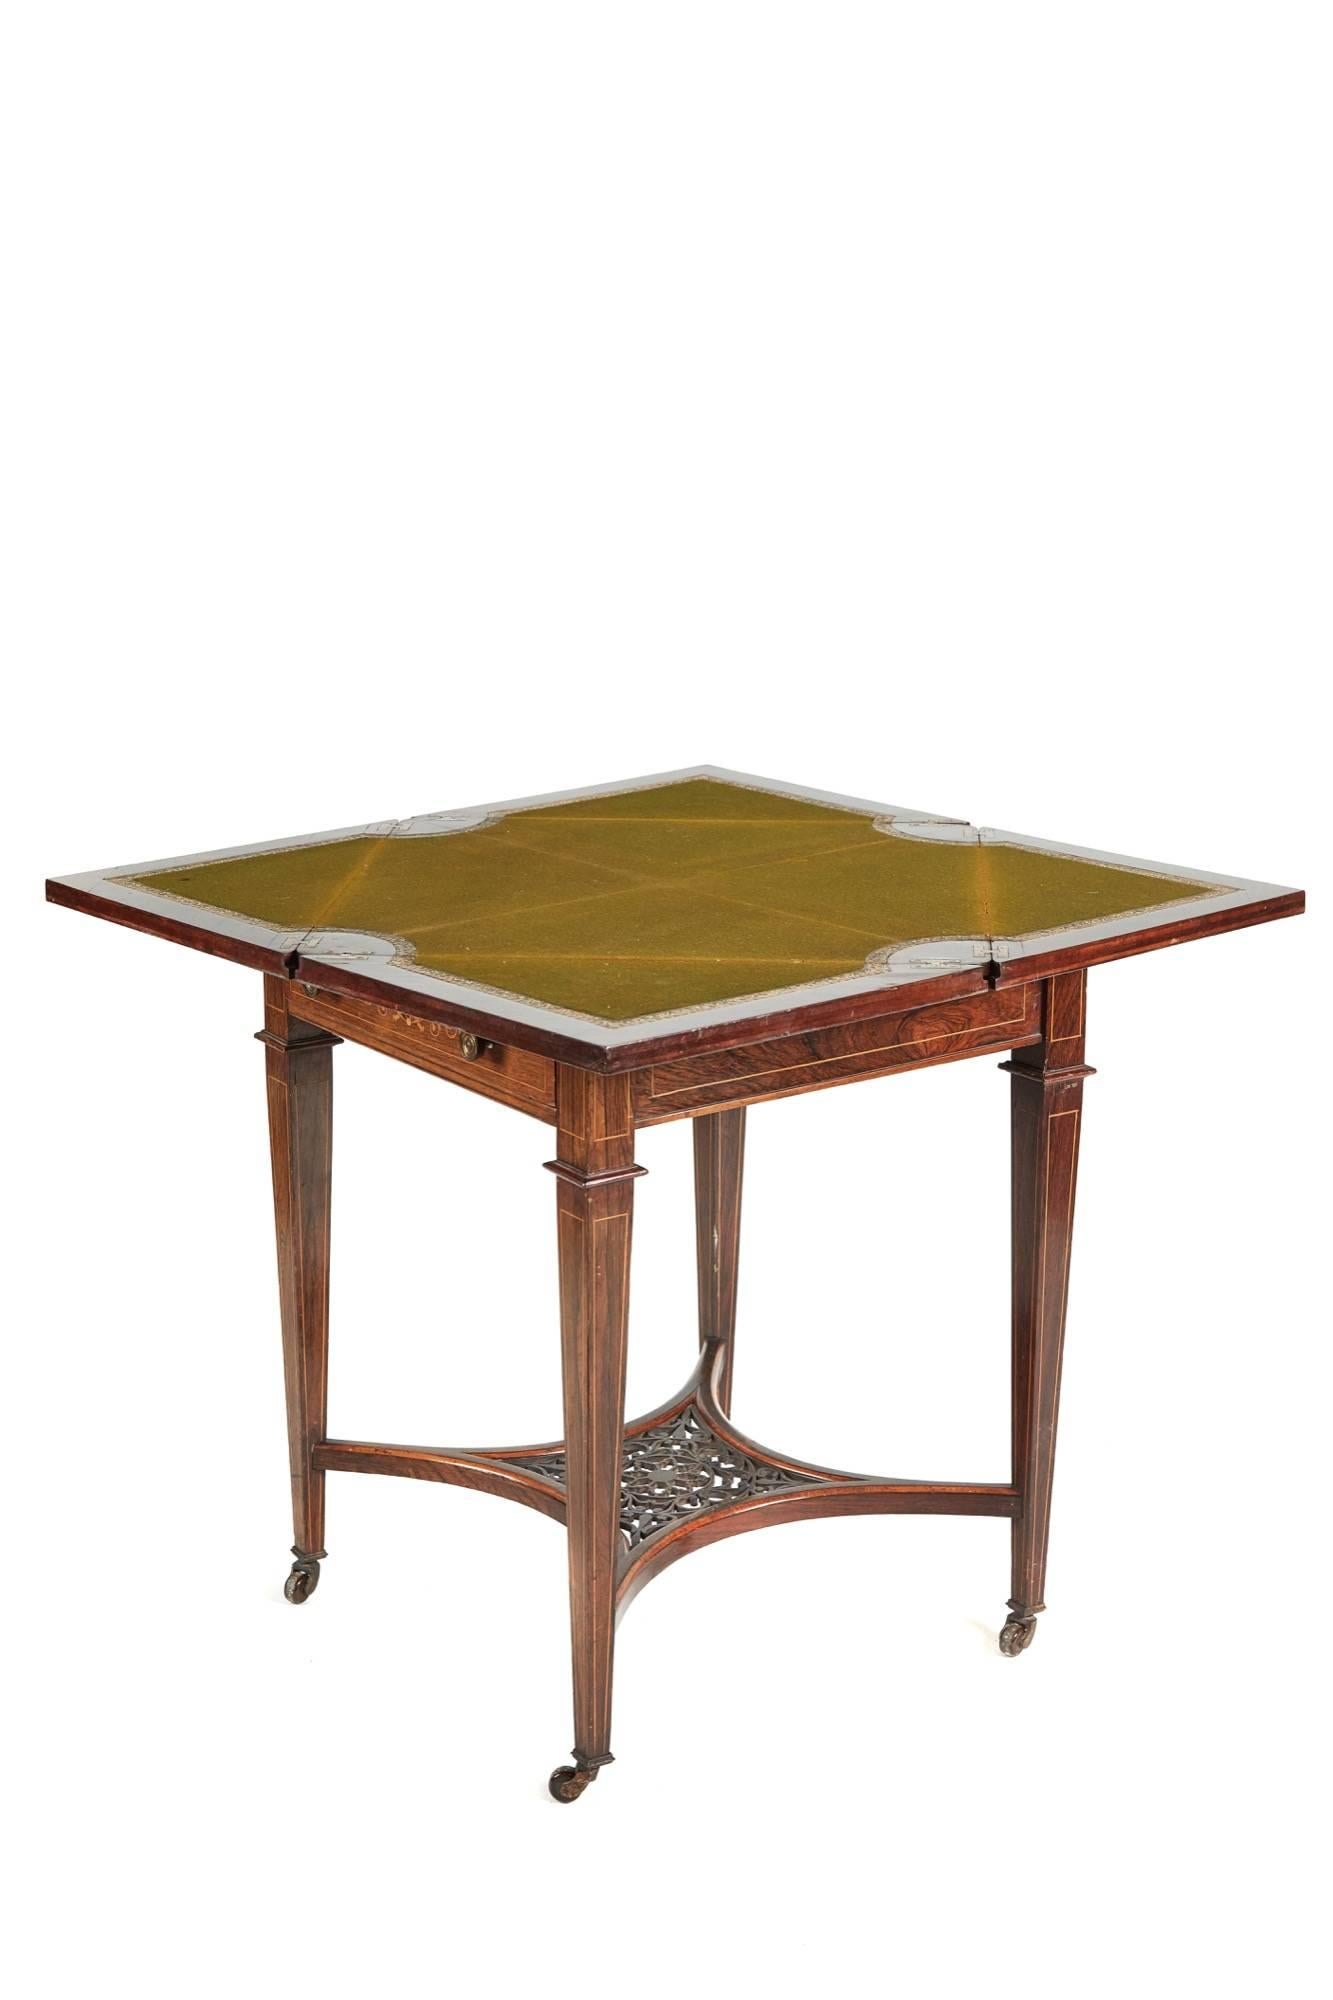 A rosewood and marquetry inlaid envelope card table, the fold-over top opening to reveal baize lined playing surface above a frieze drawer, the platform under tier with fret carved centre section, inlaid square tapering legs with original castors,